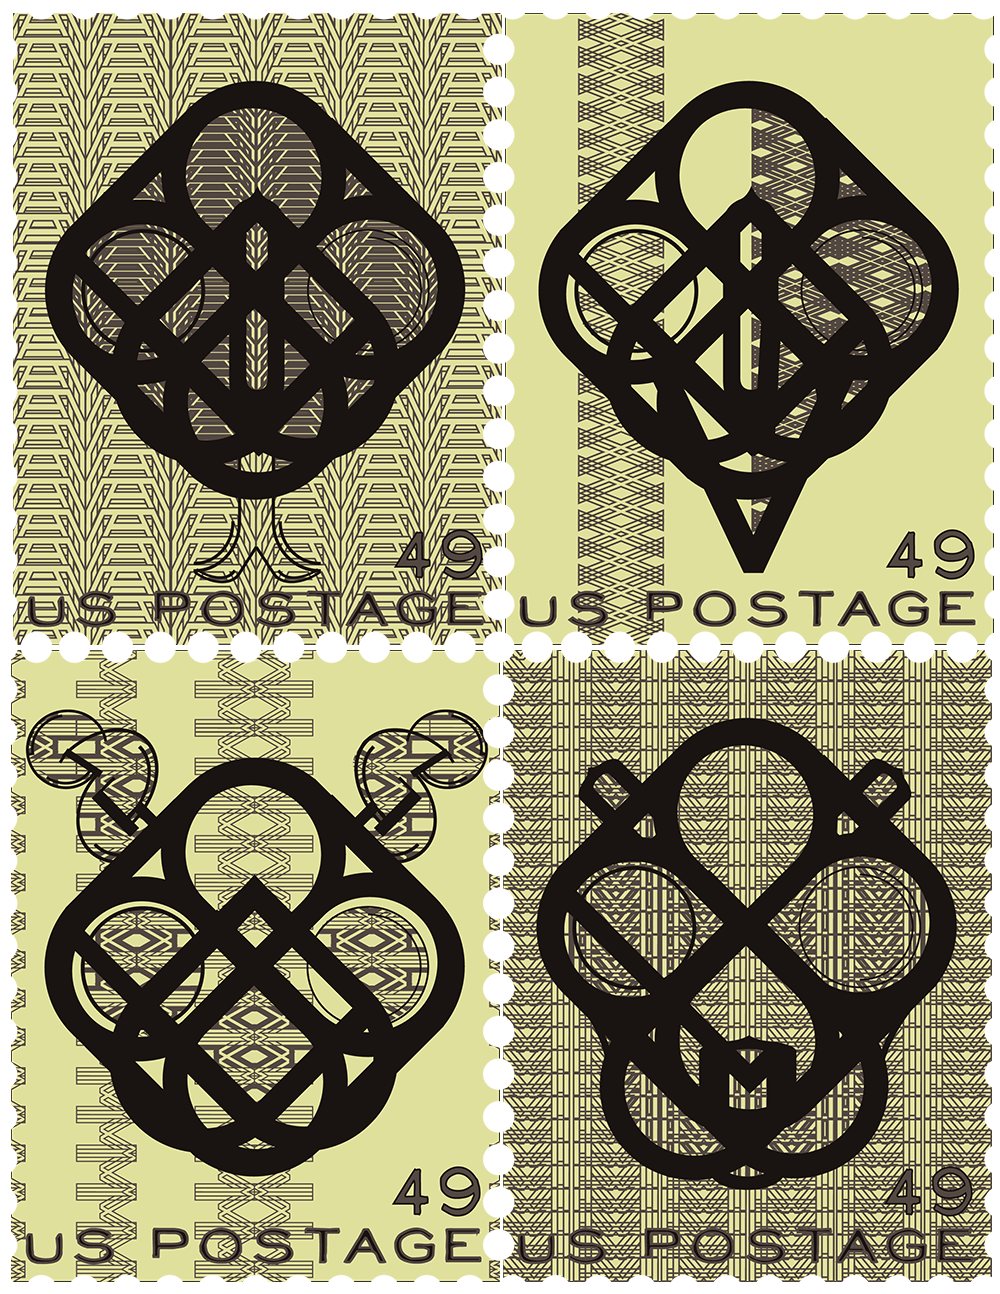  Typography Stamps image 